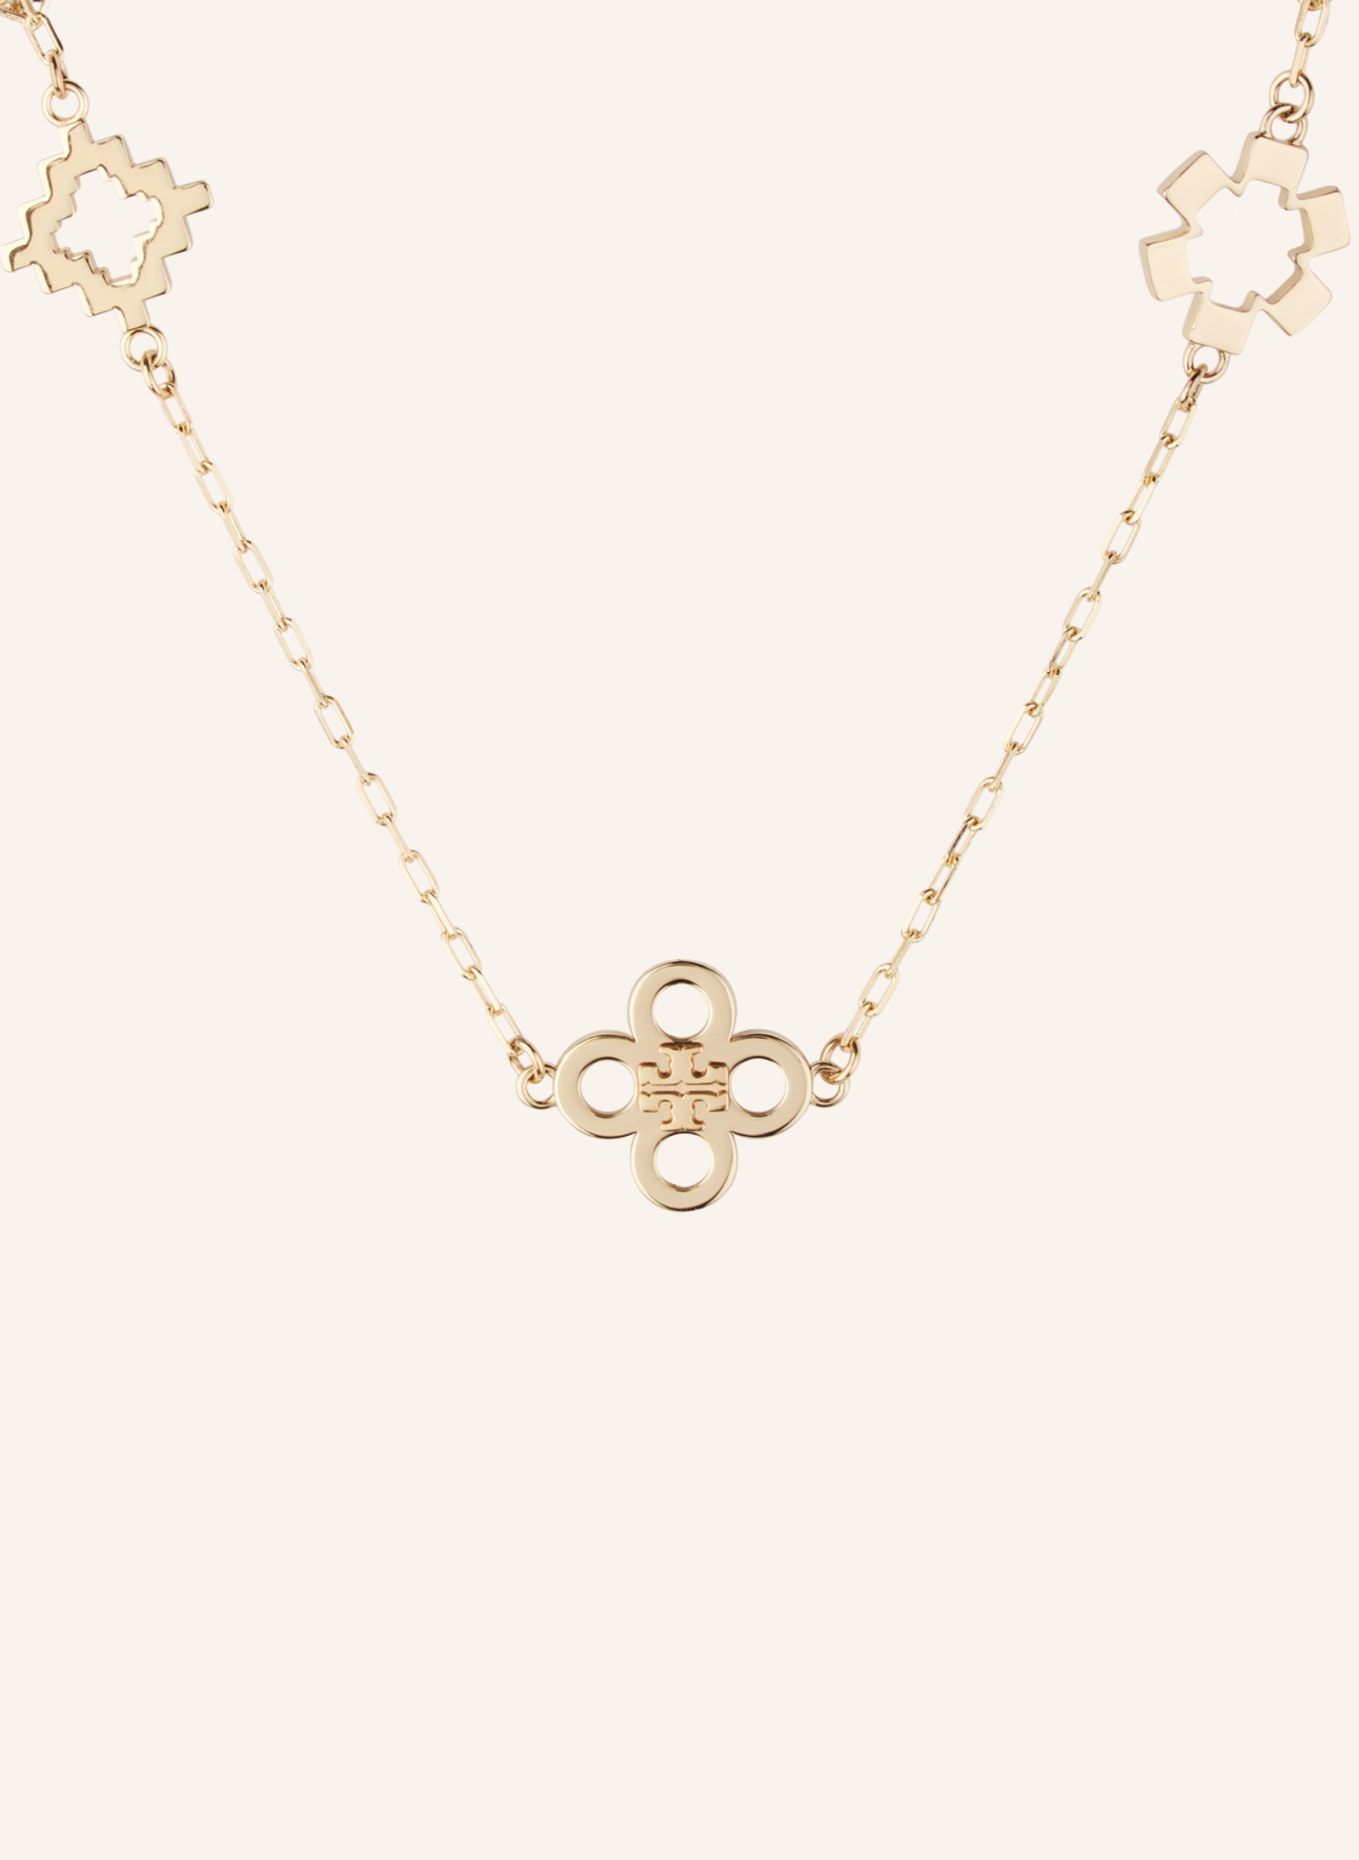 Tory Burch Kira Clover Necklace and Earrings Set | Harrods US